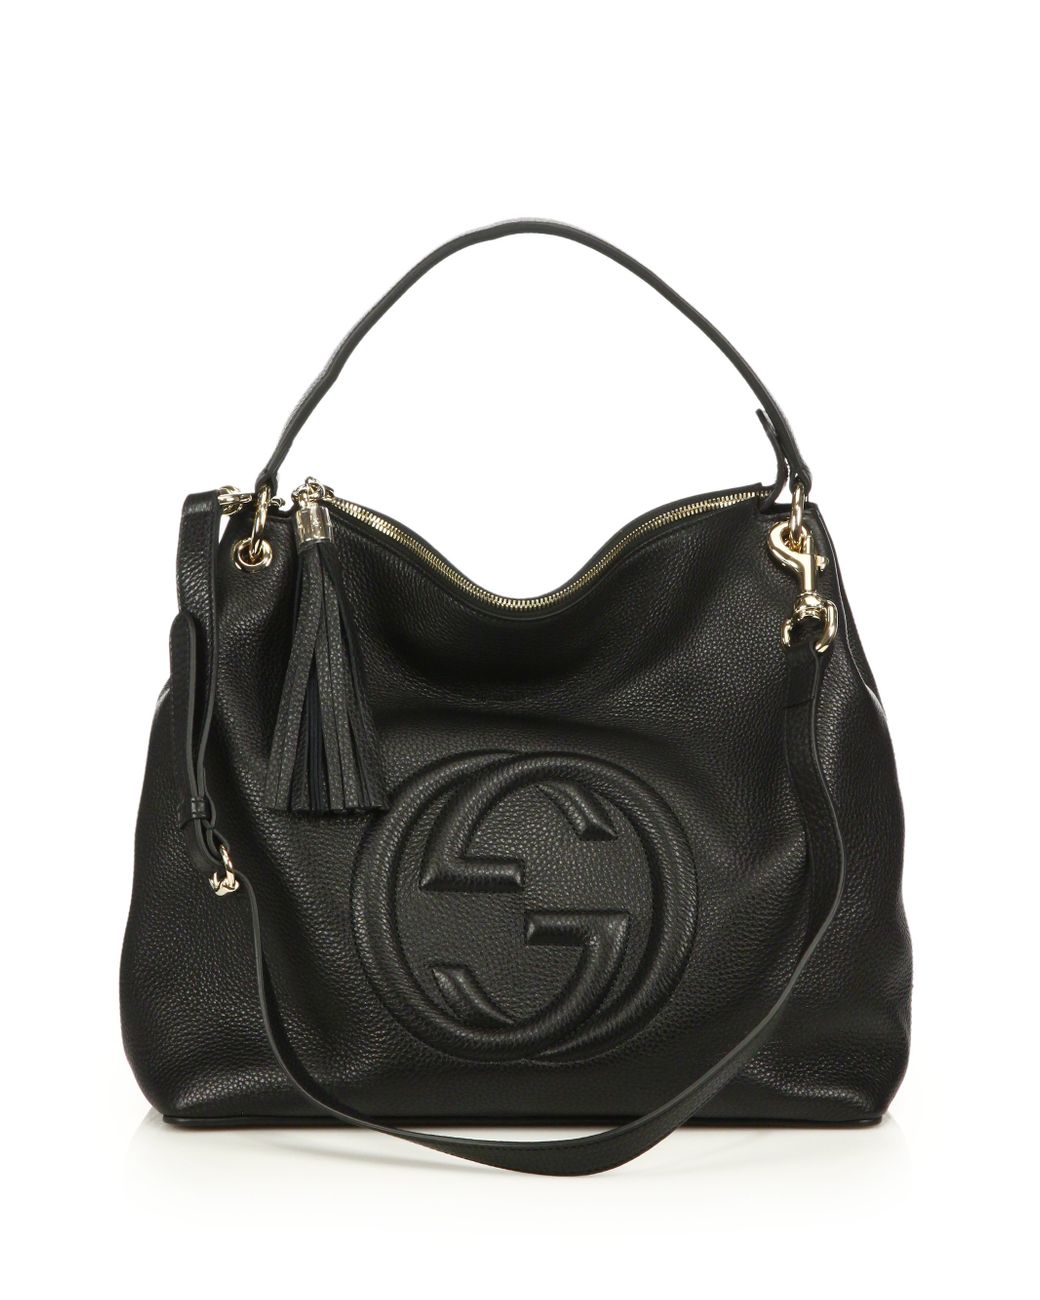 Gucci Soho Large Hobo Bag in Brown | Lyst